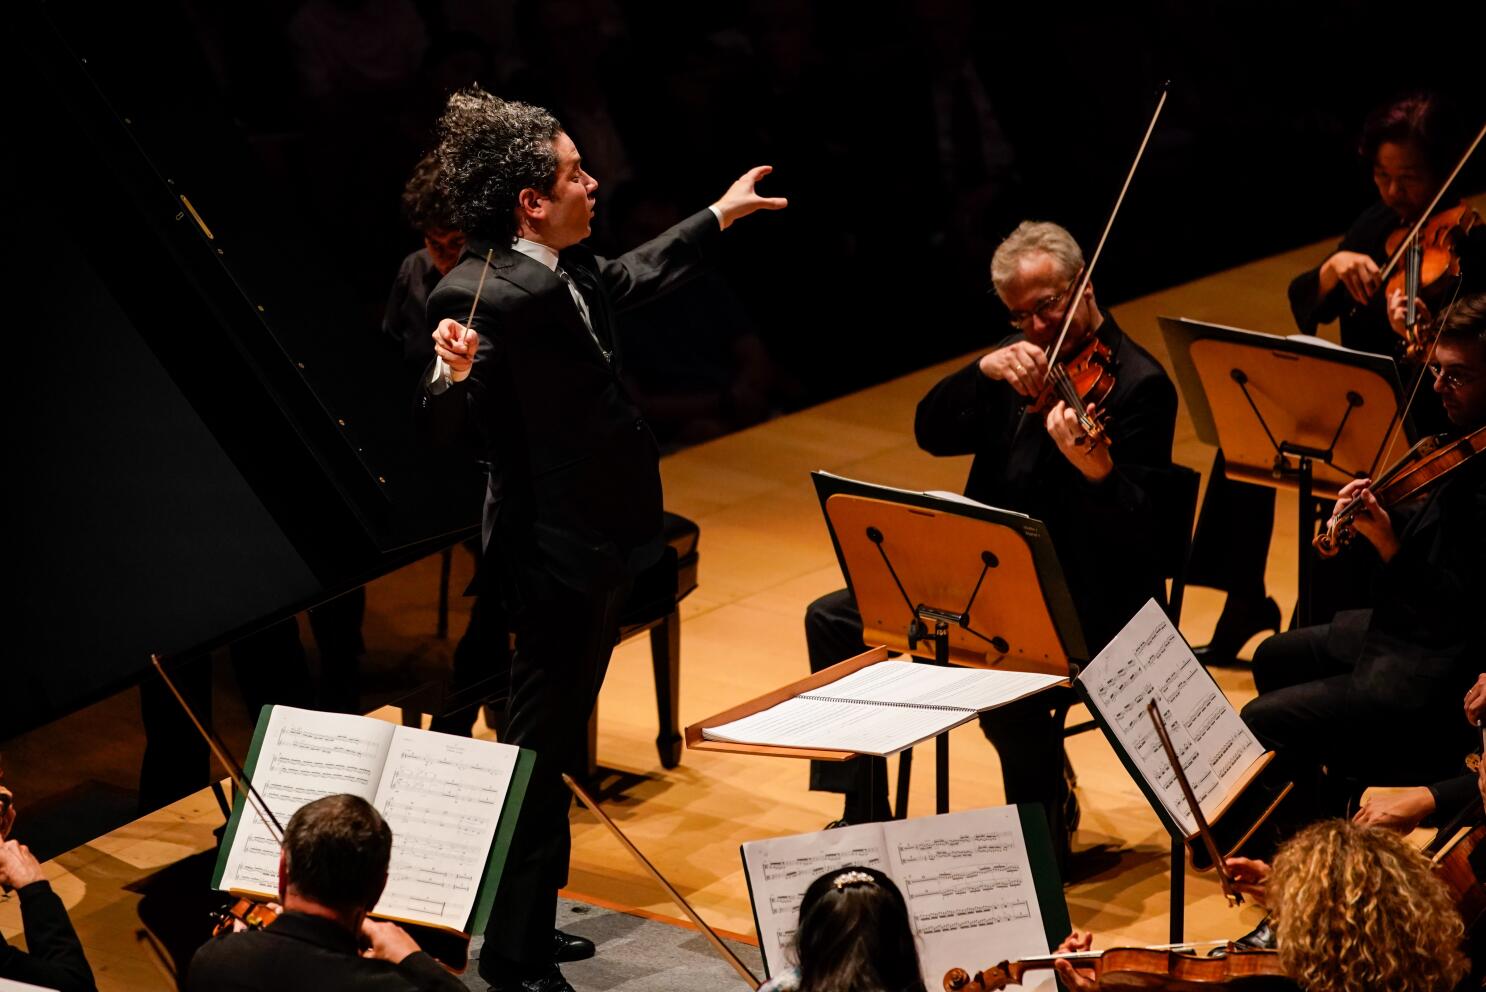 Los Angeles Times on X: L.A. Philharmonic music and artistic director Gustavo  Dudamel has announced that he will leave the L.A. Phil for the New York  Philharmonic at the conclusion of his